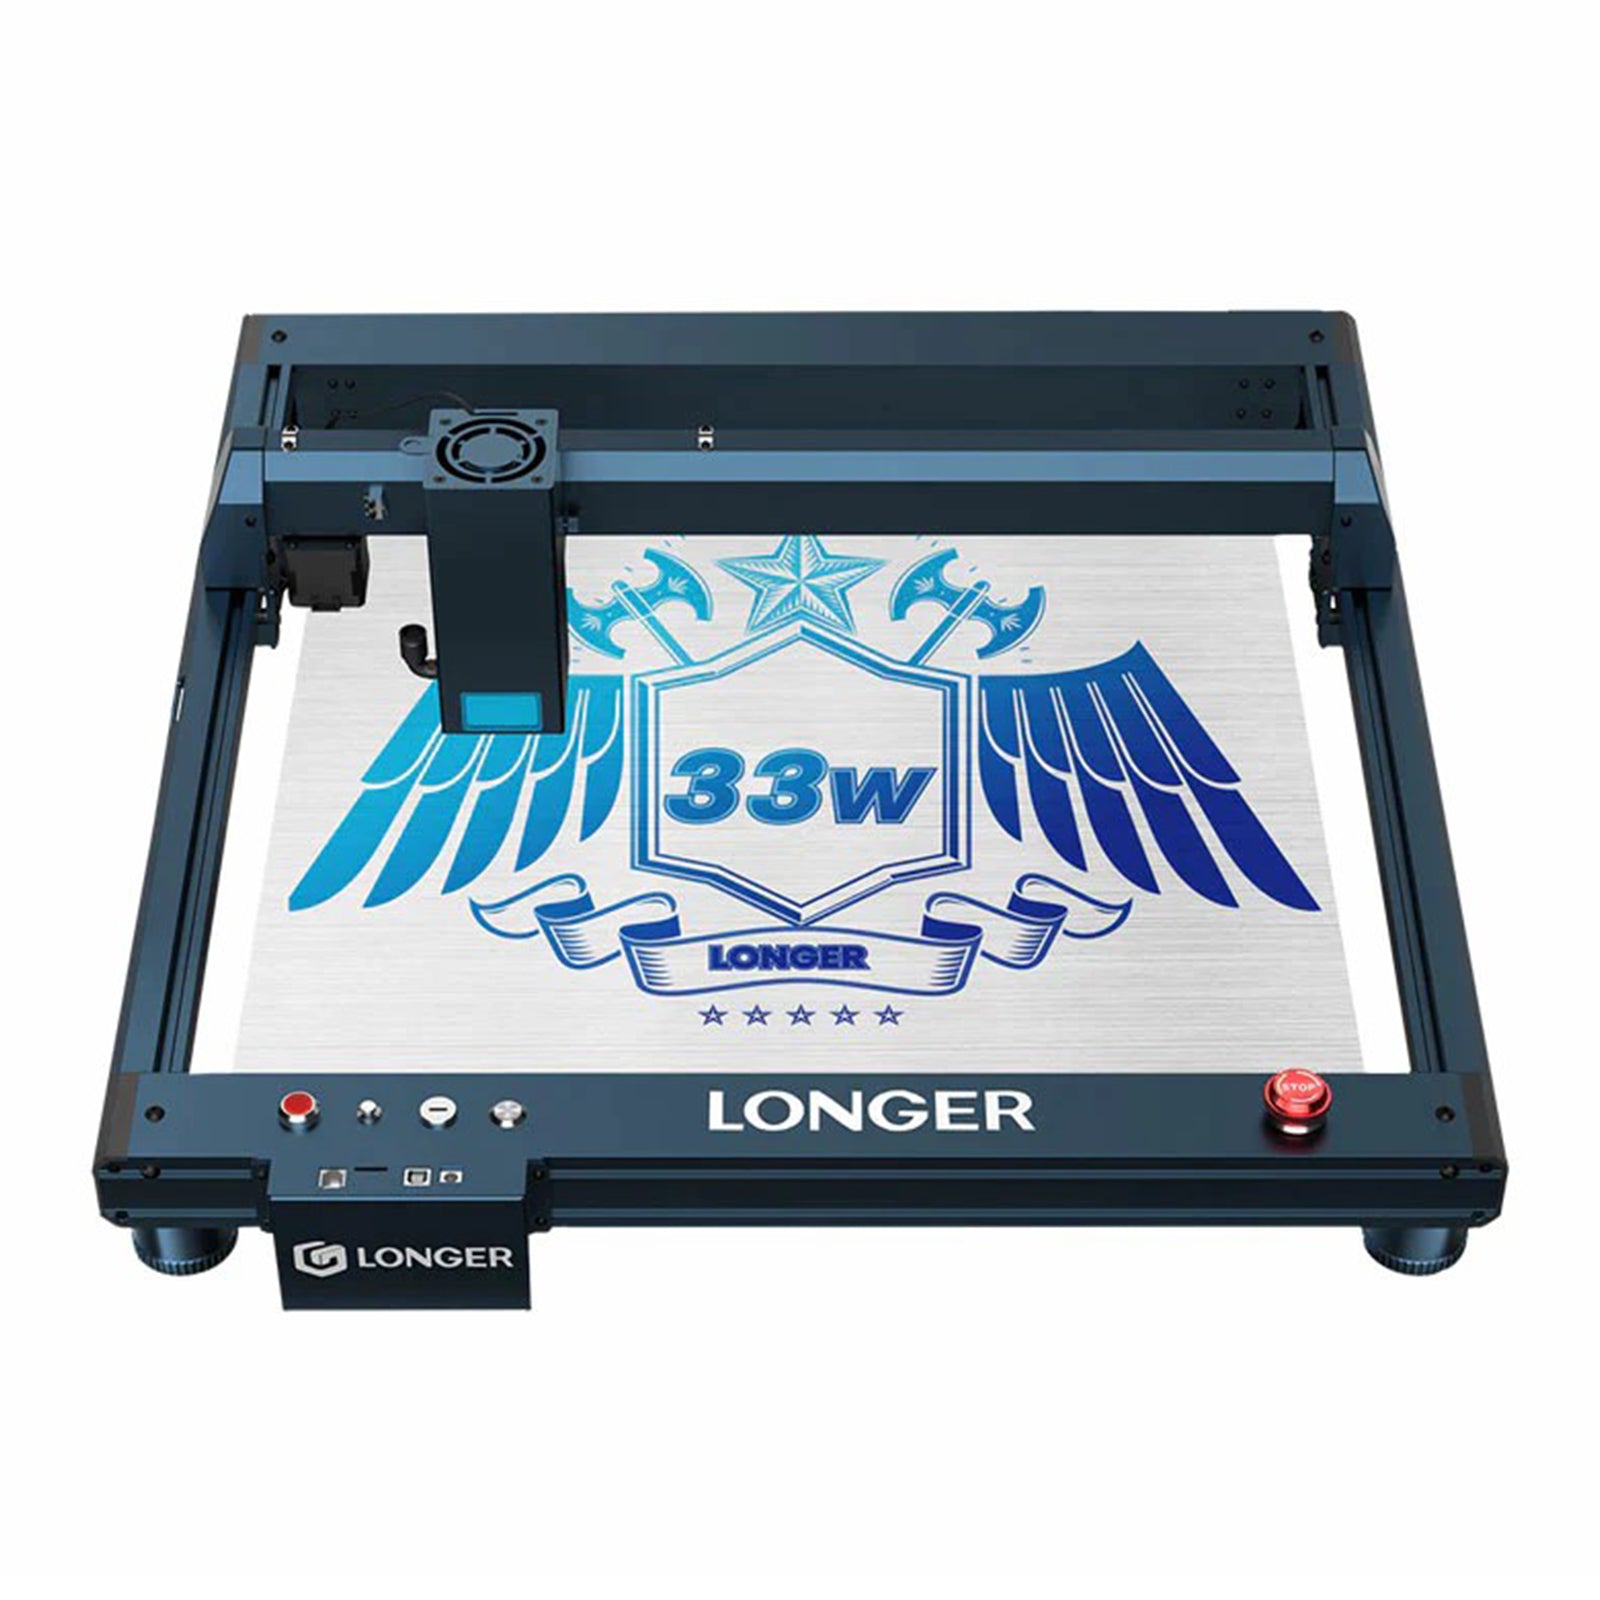 Creality Laser Engraver 22W Output, 120W High Power Laser Engraving Machine CNC, DIY Laser Cutter and Engraver Machine for Metal and Wood, Paper